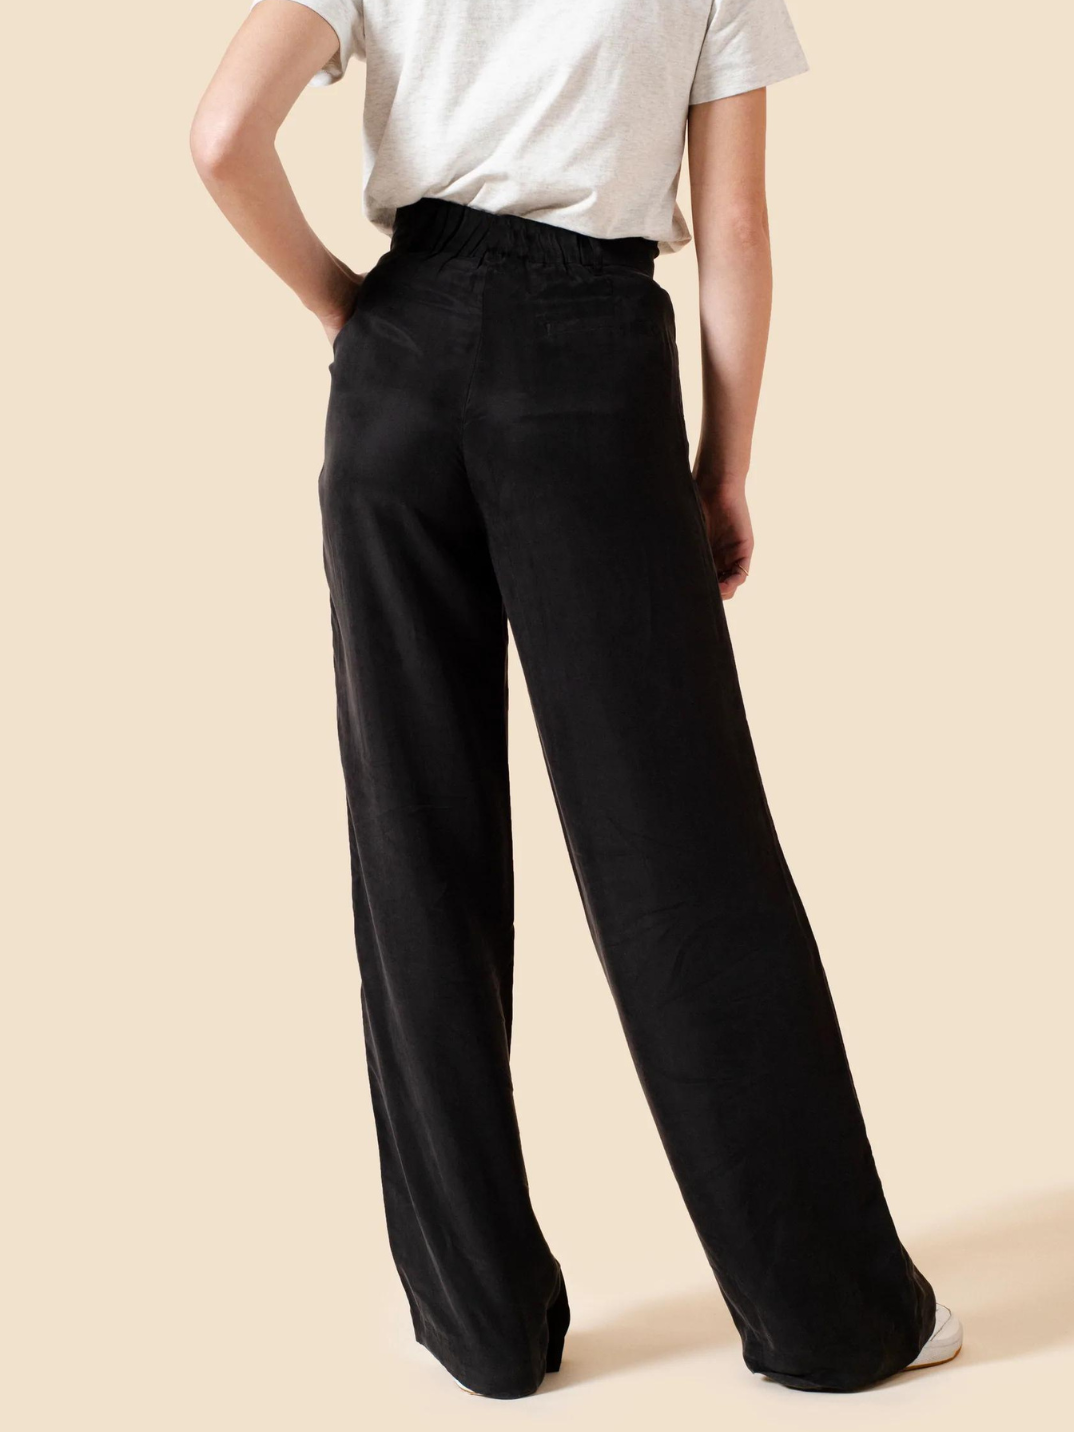 No capsule wardrobe is complete without that perfect pair of wide leg pants. Cut from an ultra-soft, lightweight natural fiber, the Willow Wide Leg Pants are a high-waisted design that elongate the silhouette. Featuring an elastic back waistband and side pockets, these pants guarantee tailored comfort. Ideal for an effortlessly cool look with sneakers, or occasion dressing with heels. 